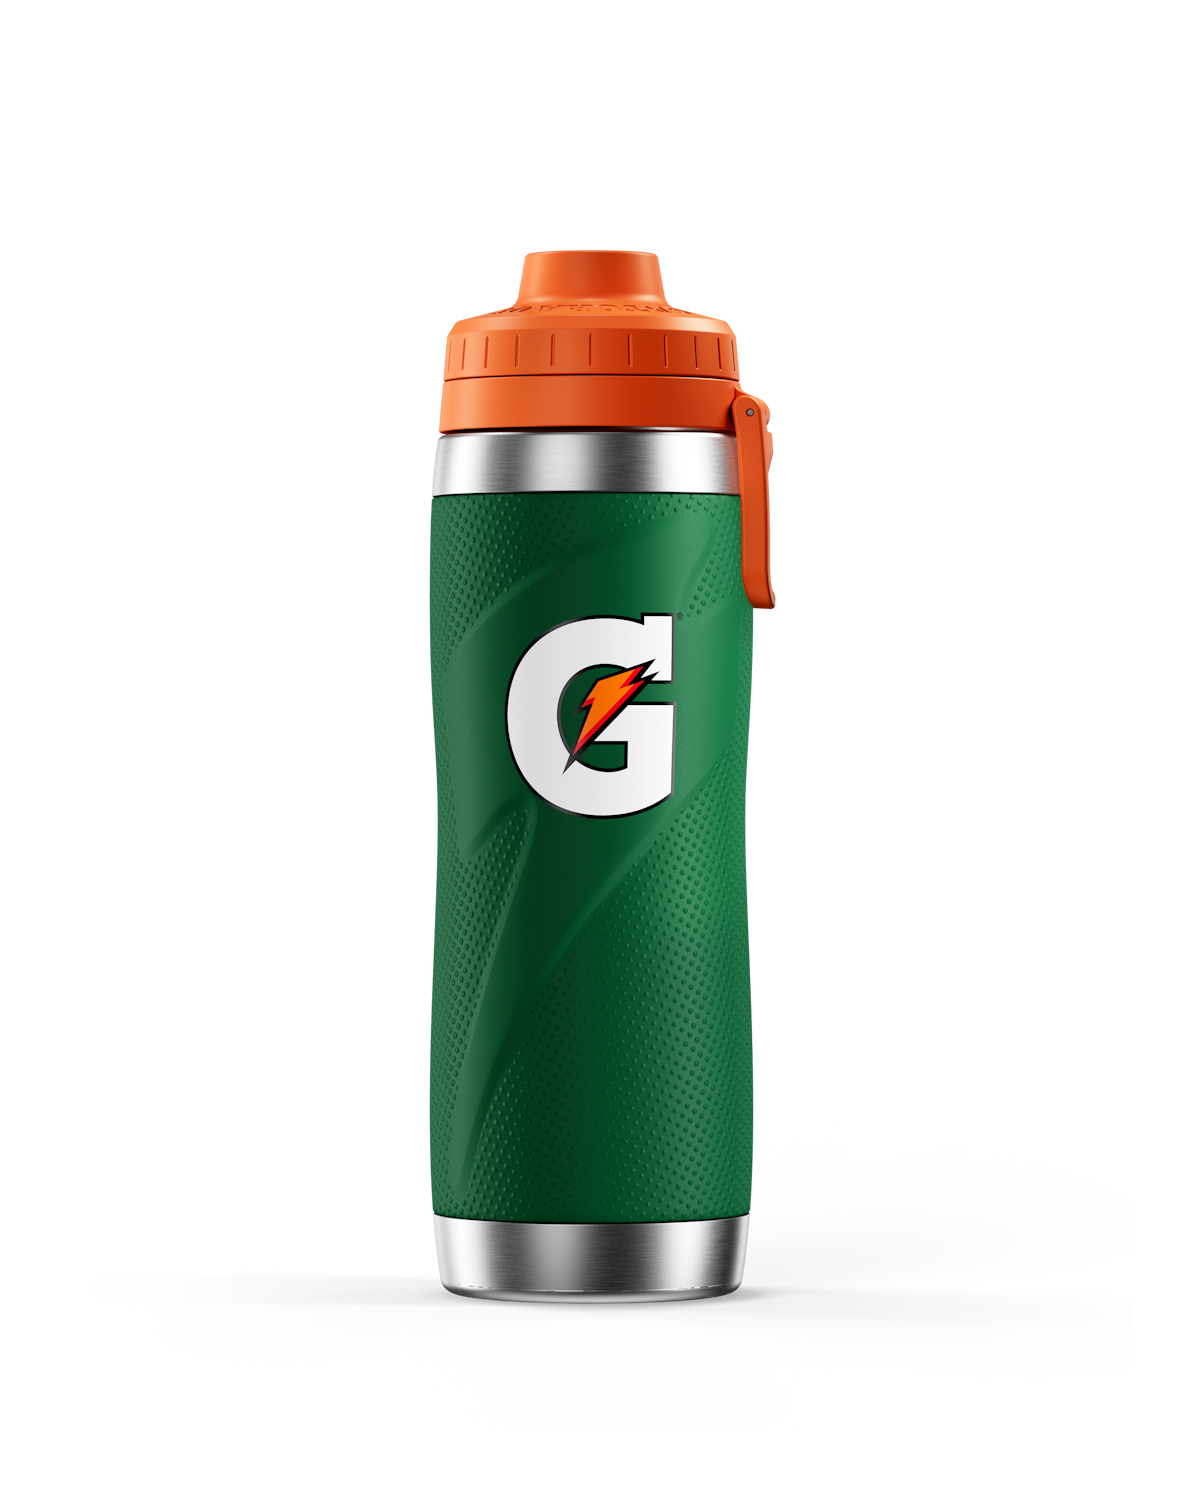 https://www.datocms-assets.com/101859/1691716433-10052000043669_stainlesssteelbottle_green_producttile_2680x3344.png?auto=format&fit=fill&w=1200&ar=16%3A9&fill=solid